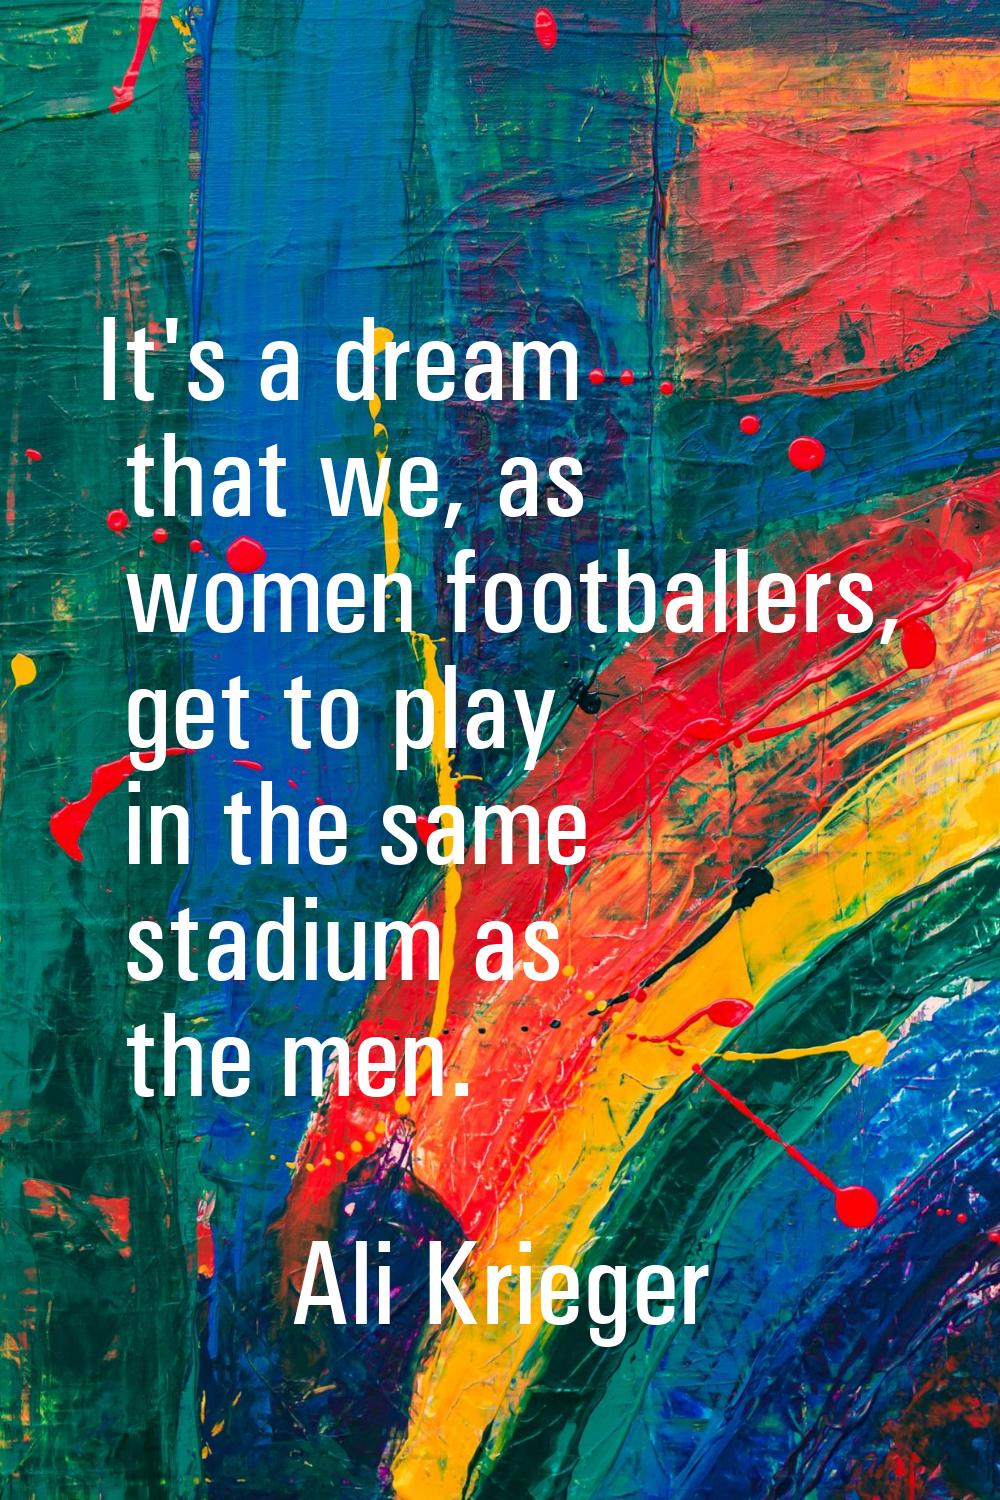 It's a dream that we, as women footballers, get to play in the same stadium as the men.